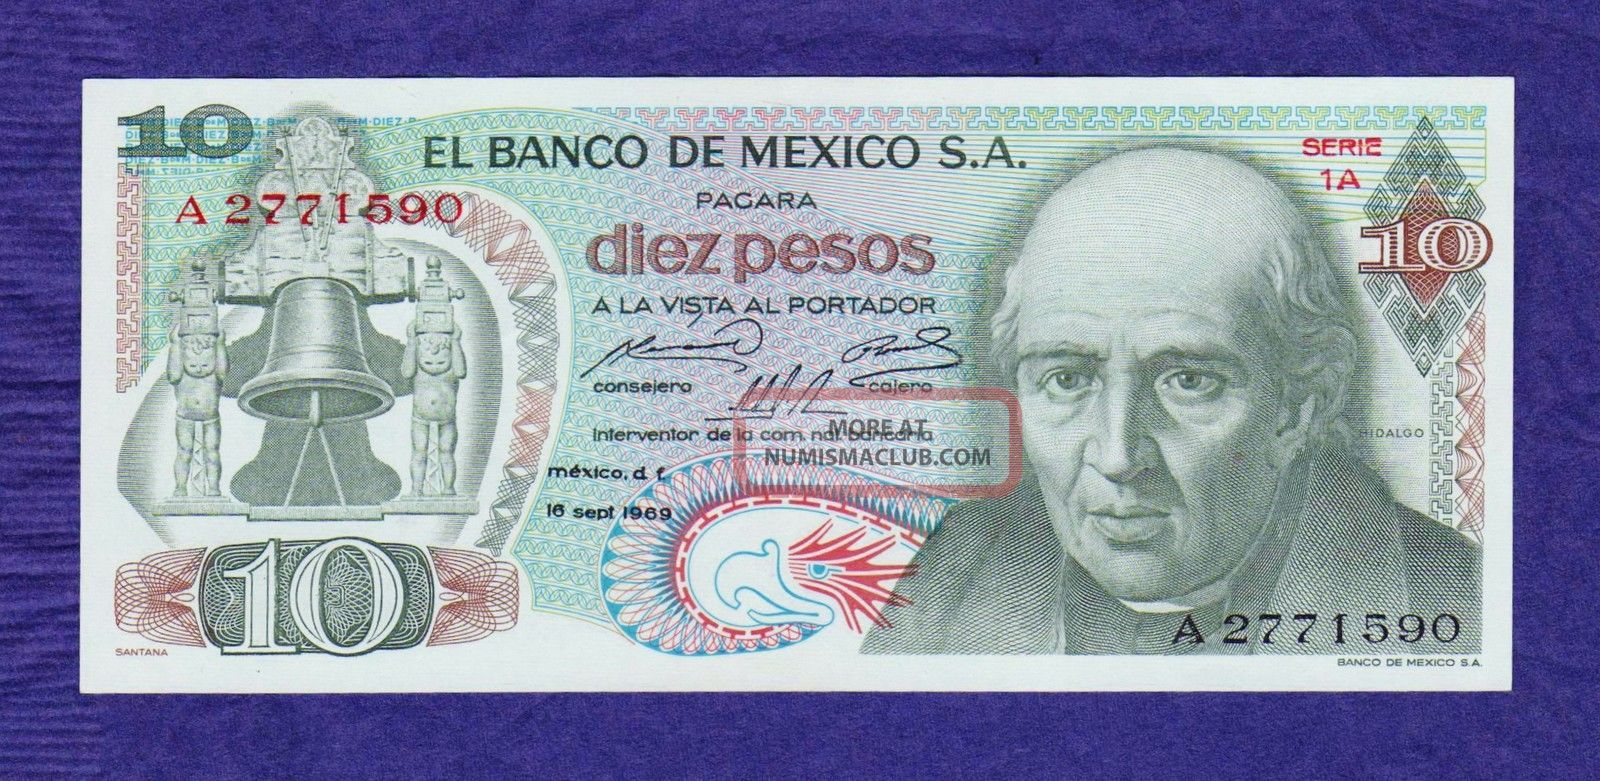 marxico link to other note